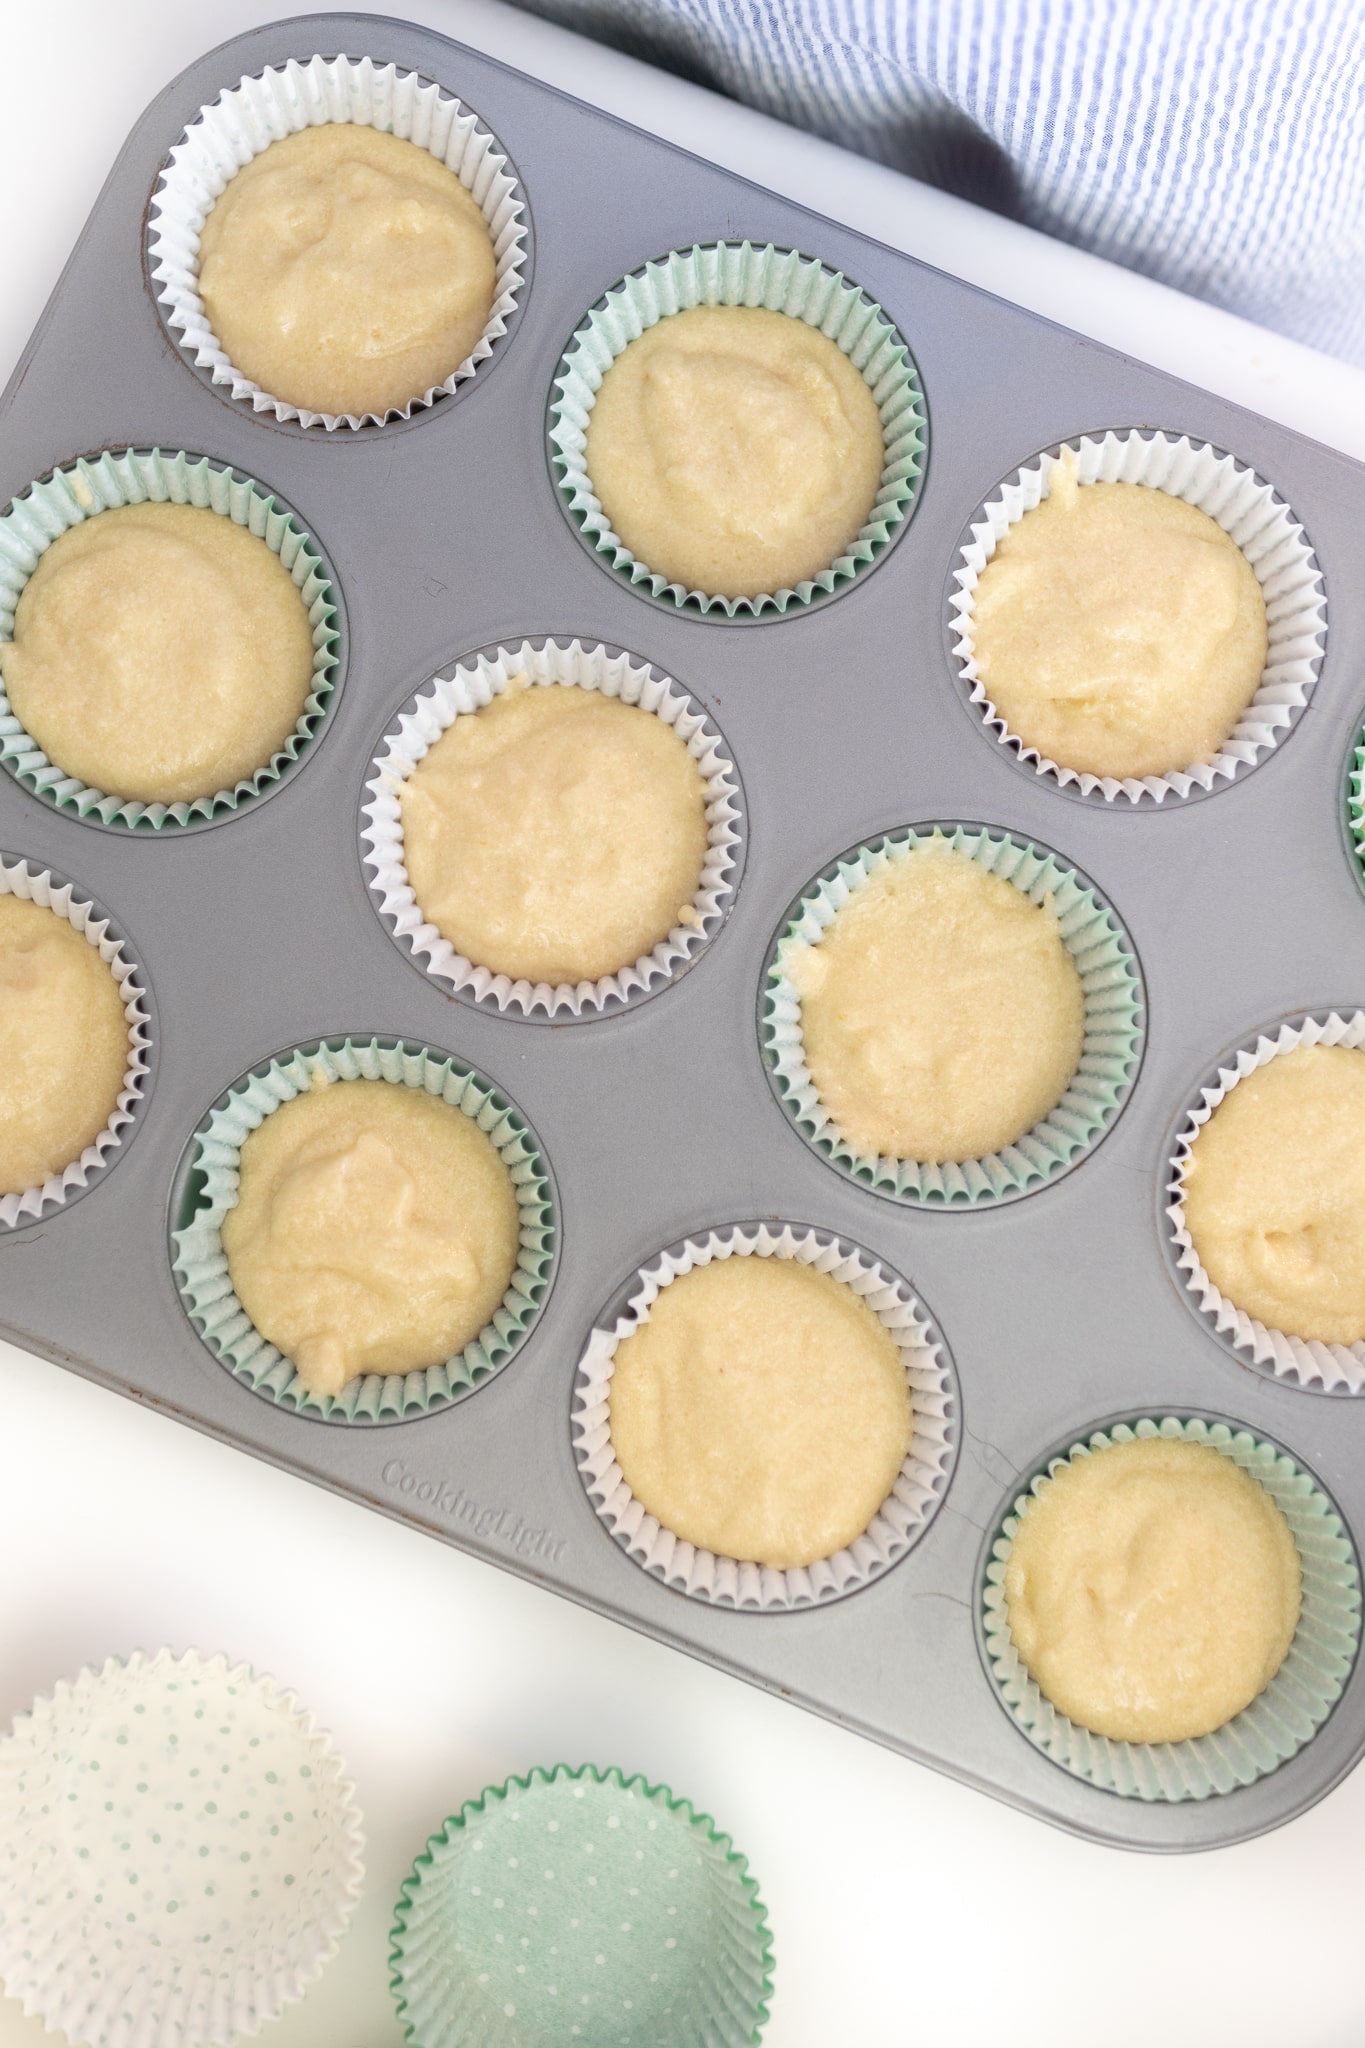 Blogger Stephanie Ziajka shows how to make mint julep flavored cupcakes on Diary of a Debutante